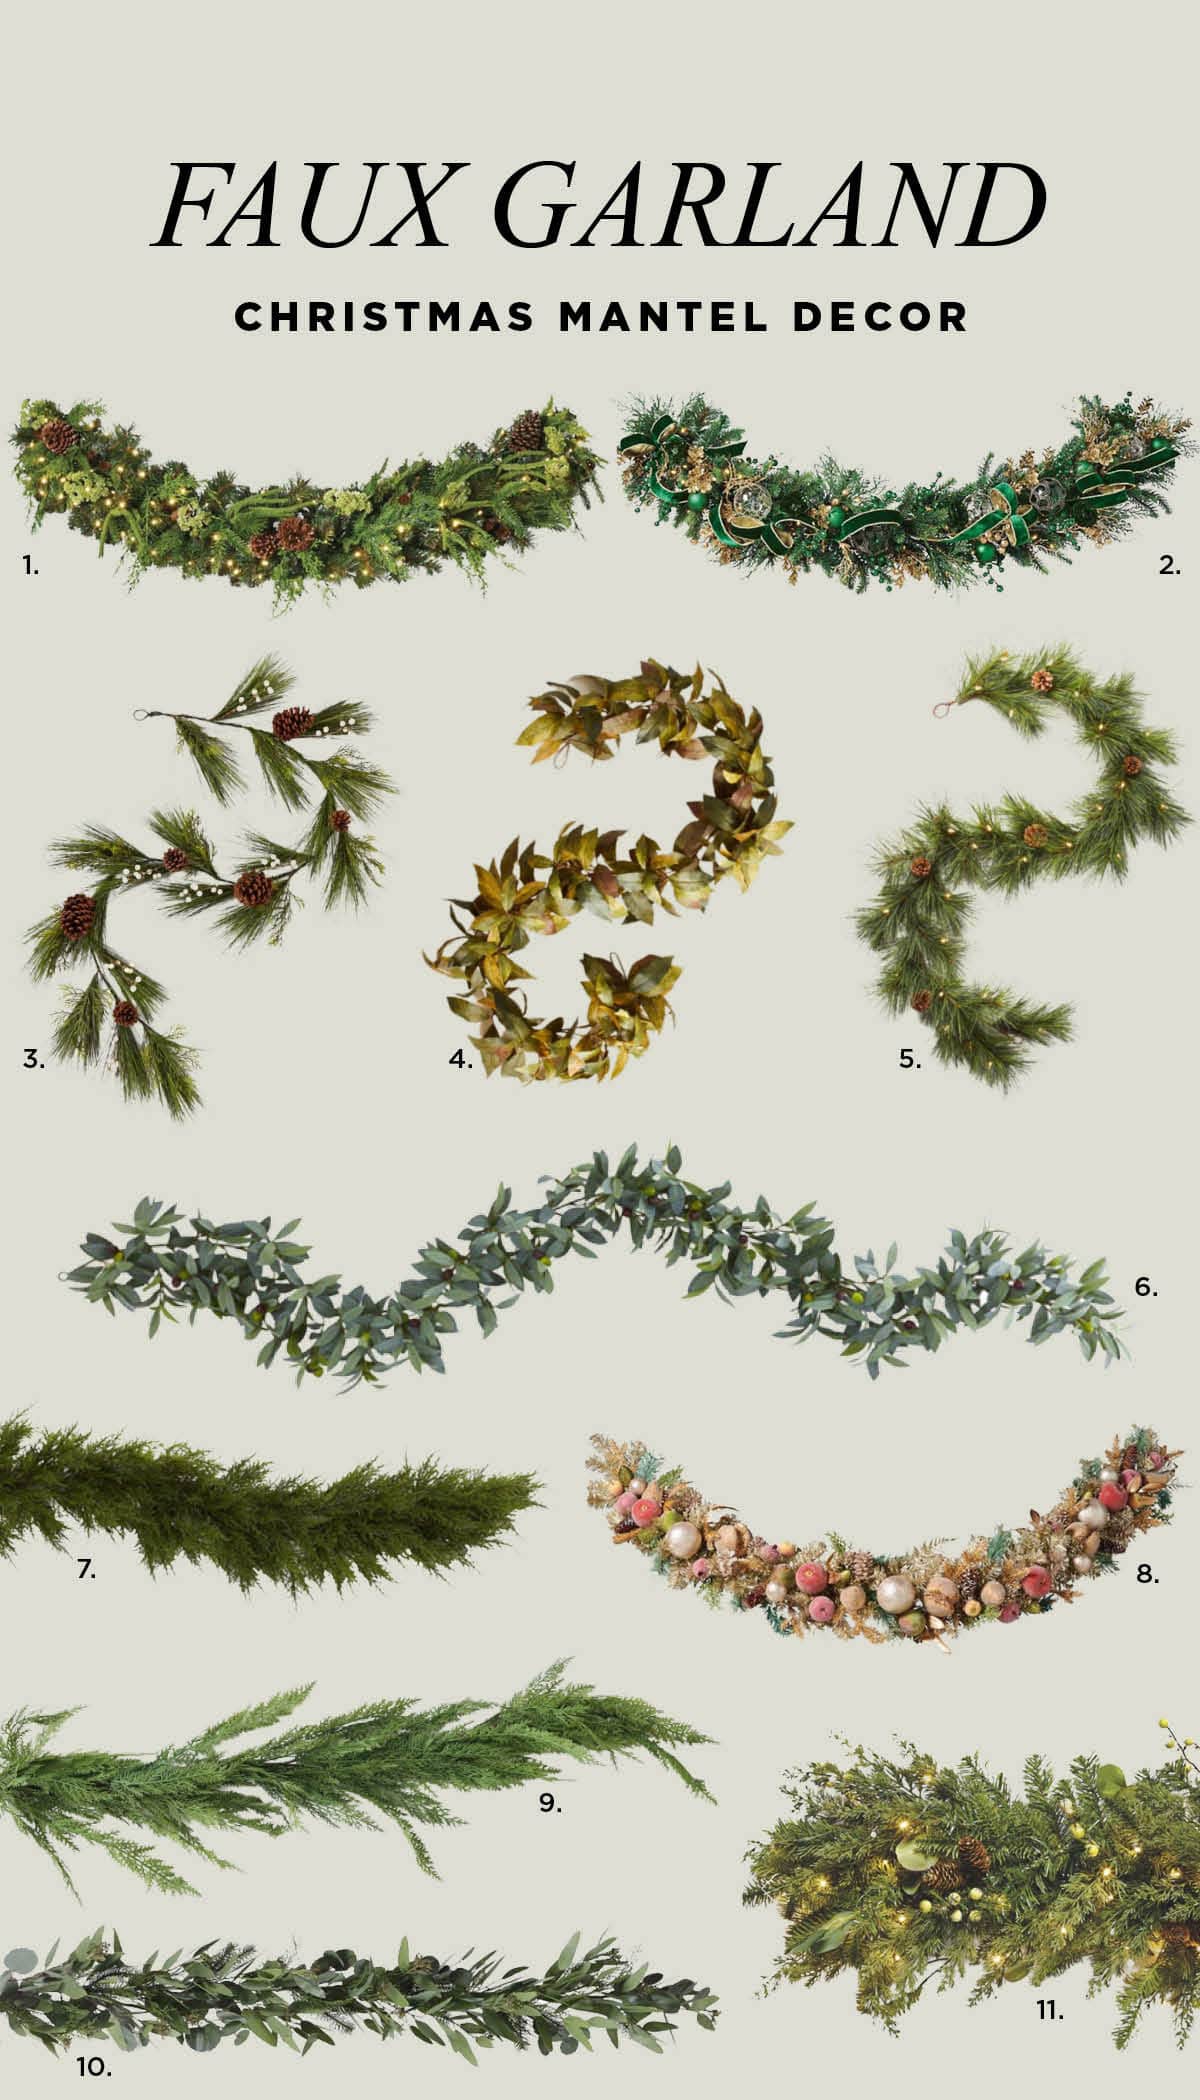 Stylish Faux Garland for Your Christmas Mantel Decor